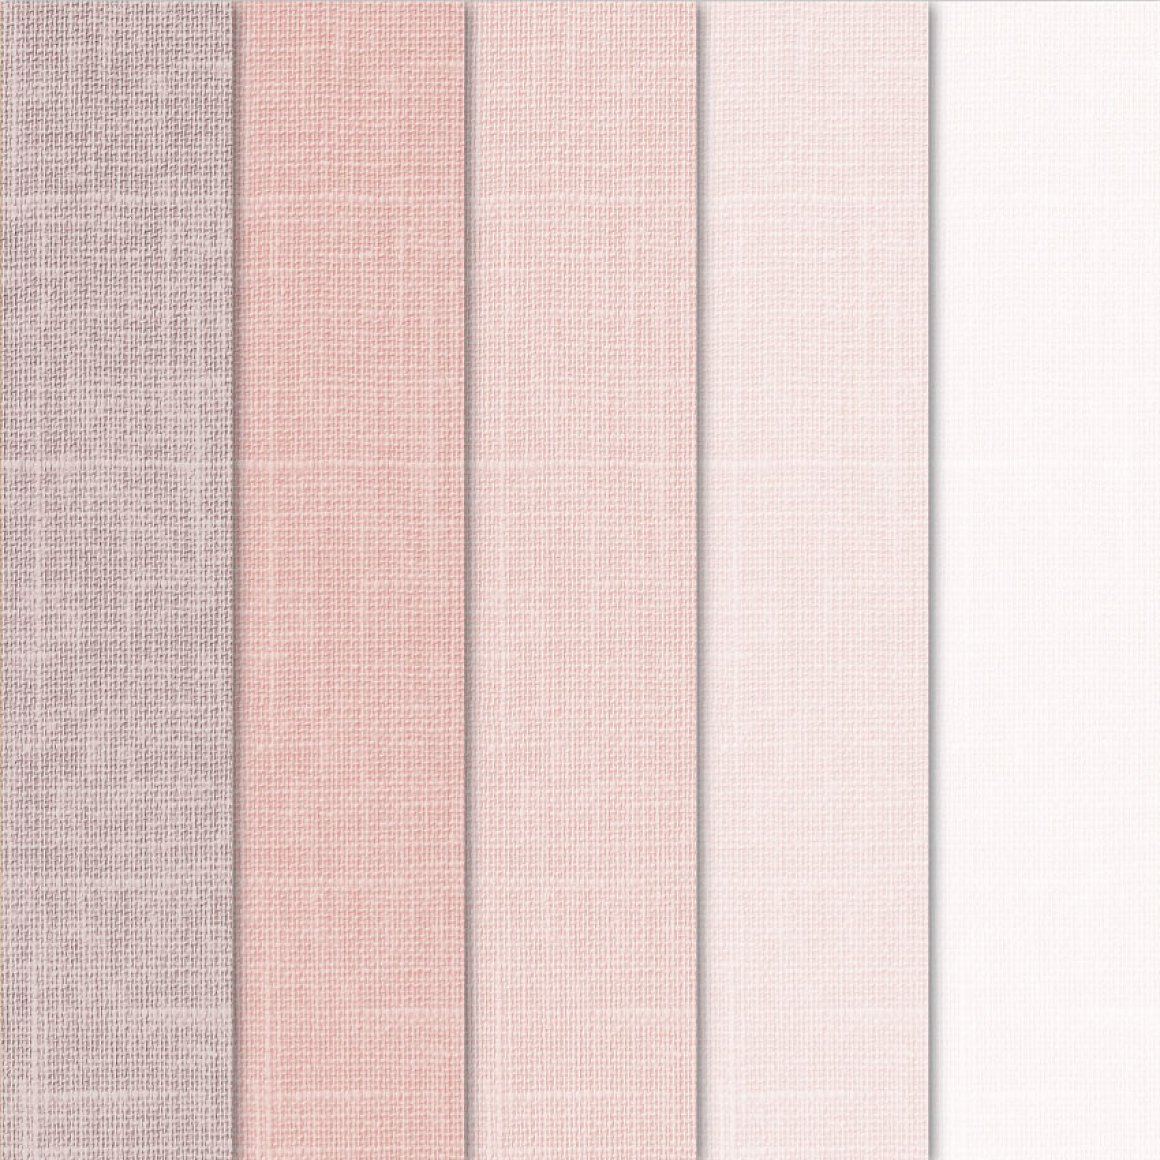 Pastel linen textures for delicate projects.